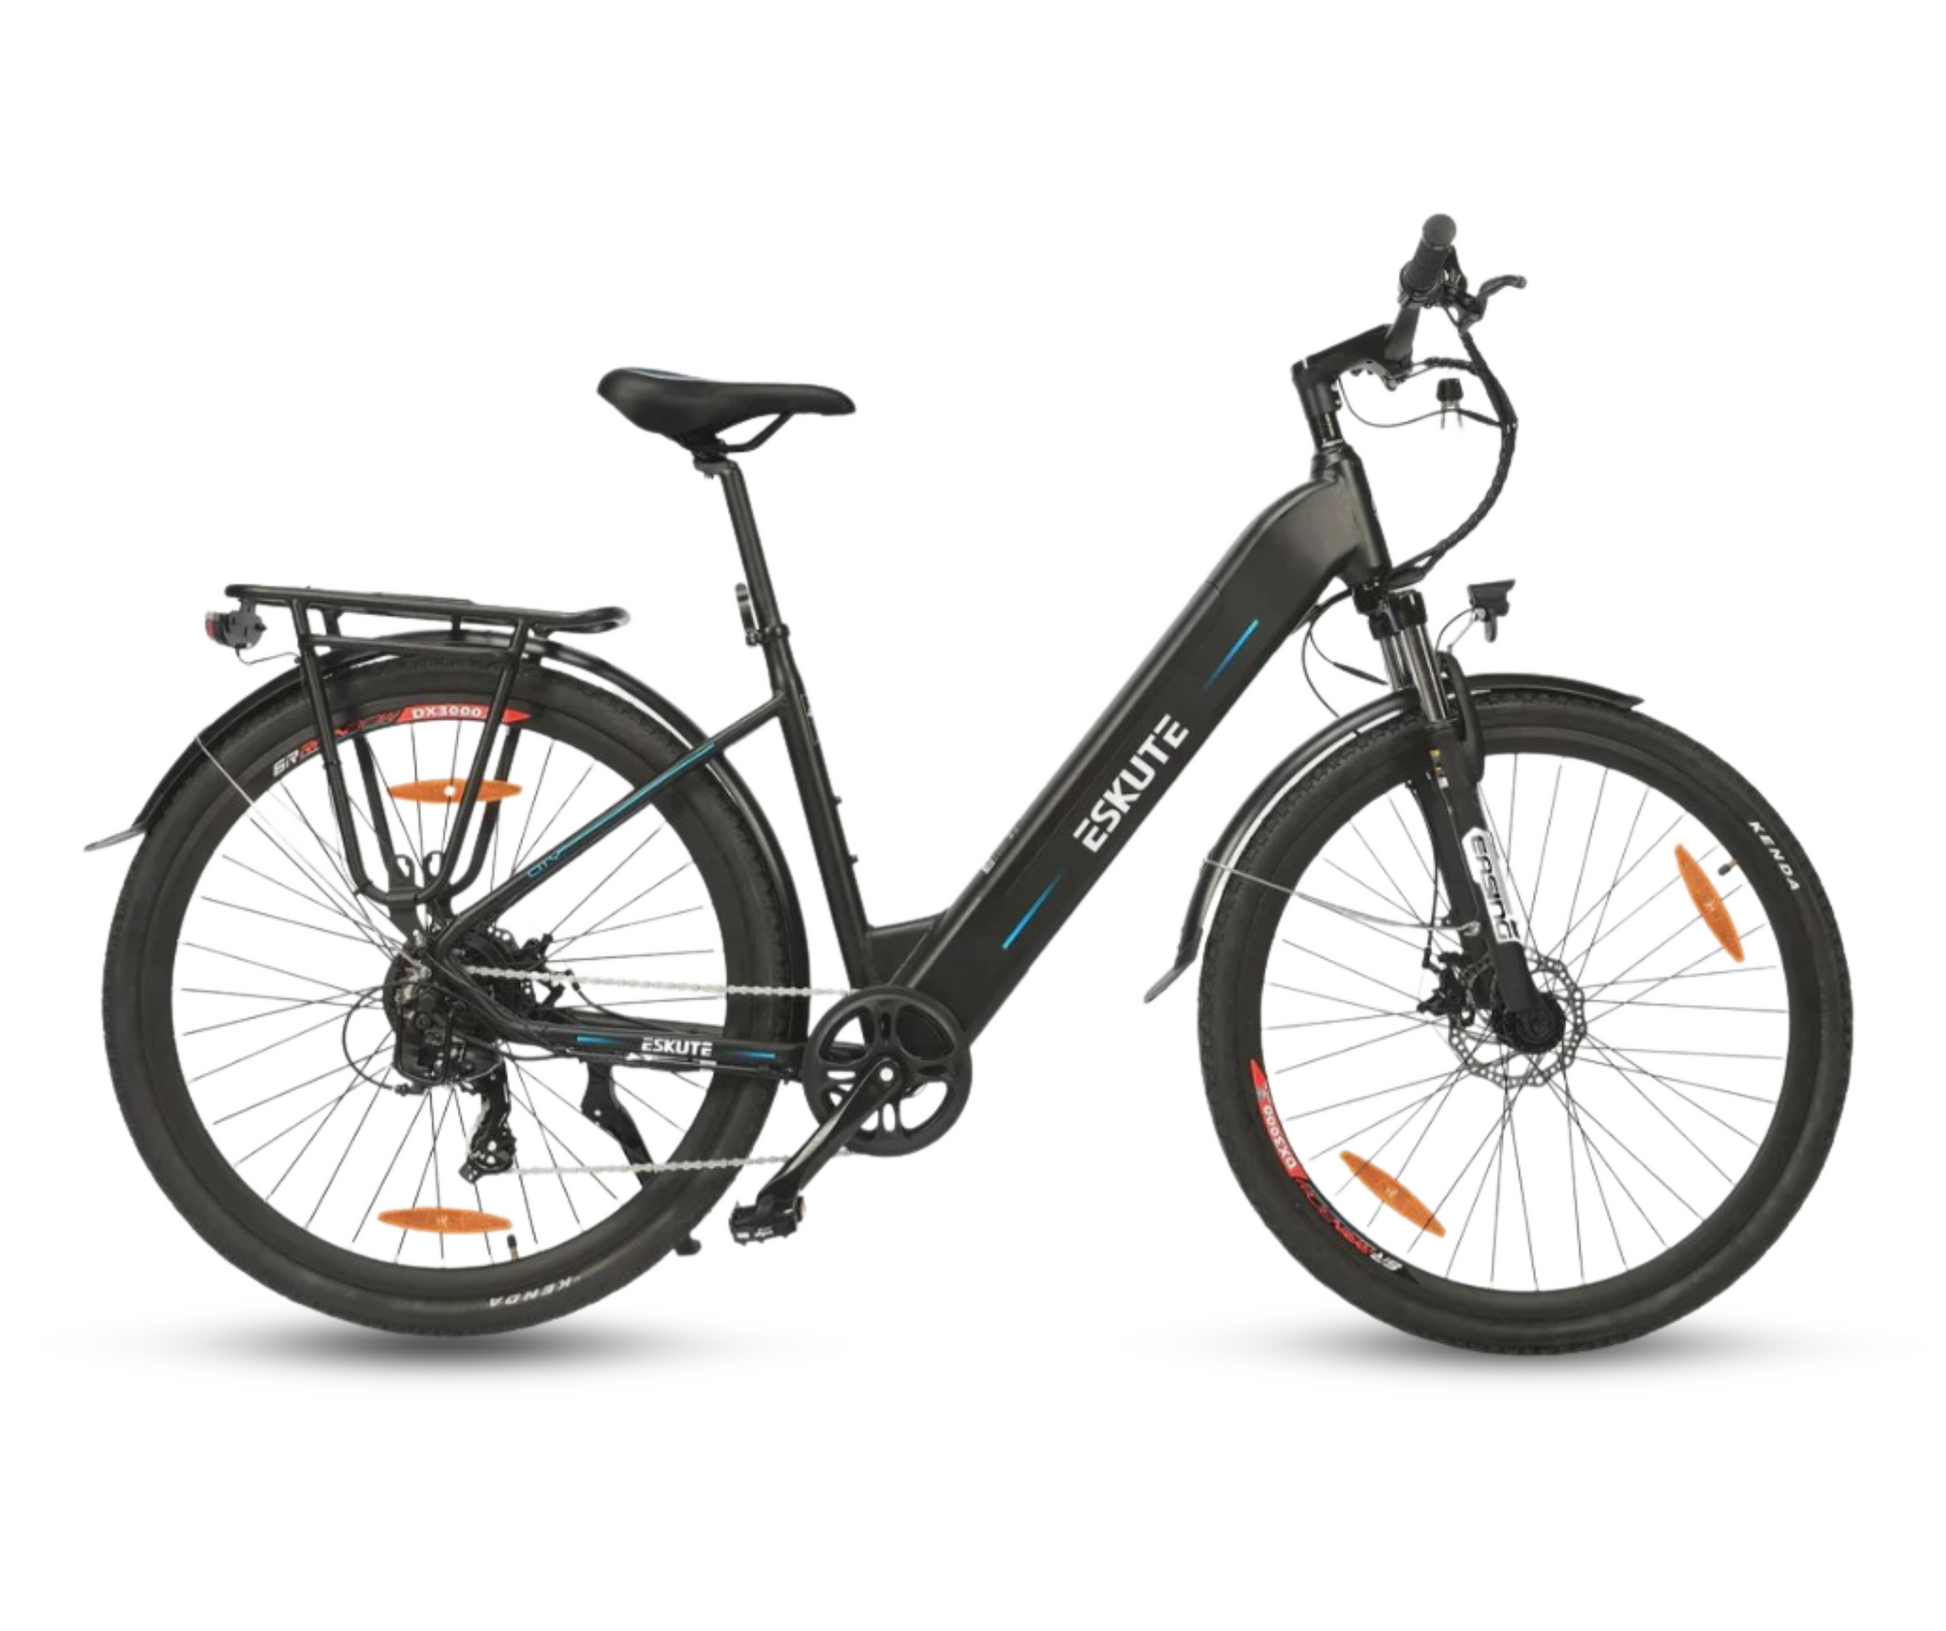 Sleek black Eskute Polluno eBike with reflective accents and disc brakes.